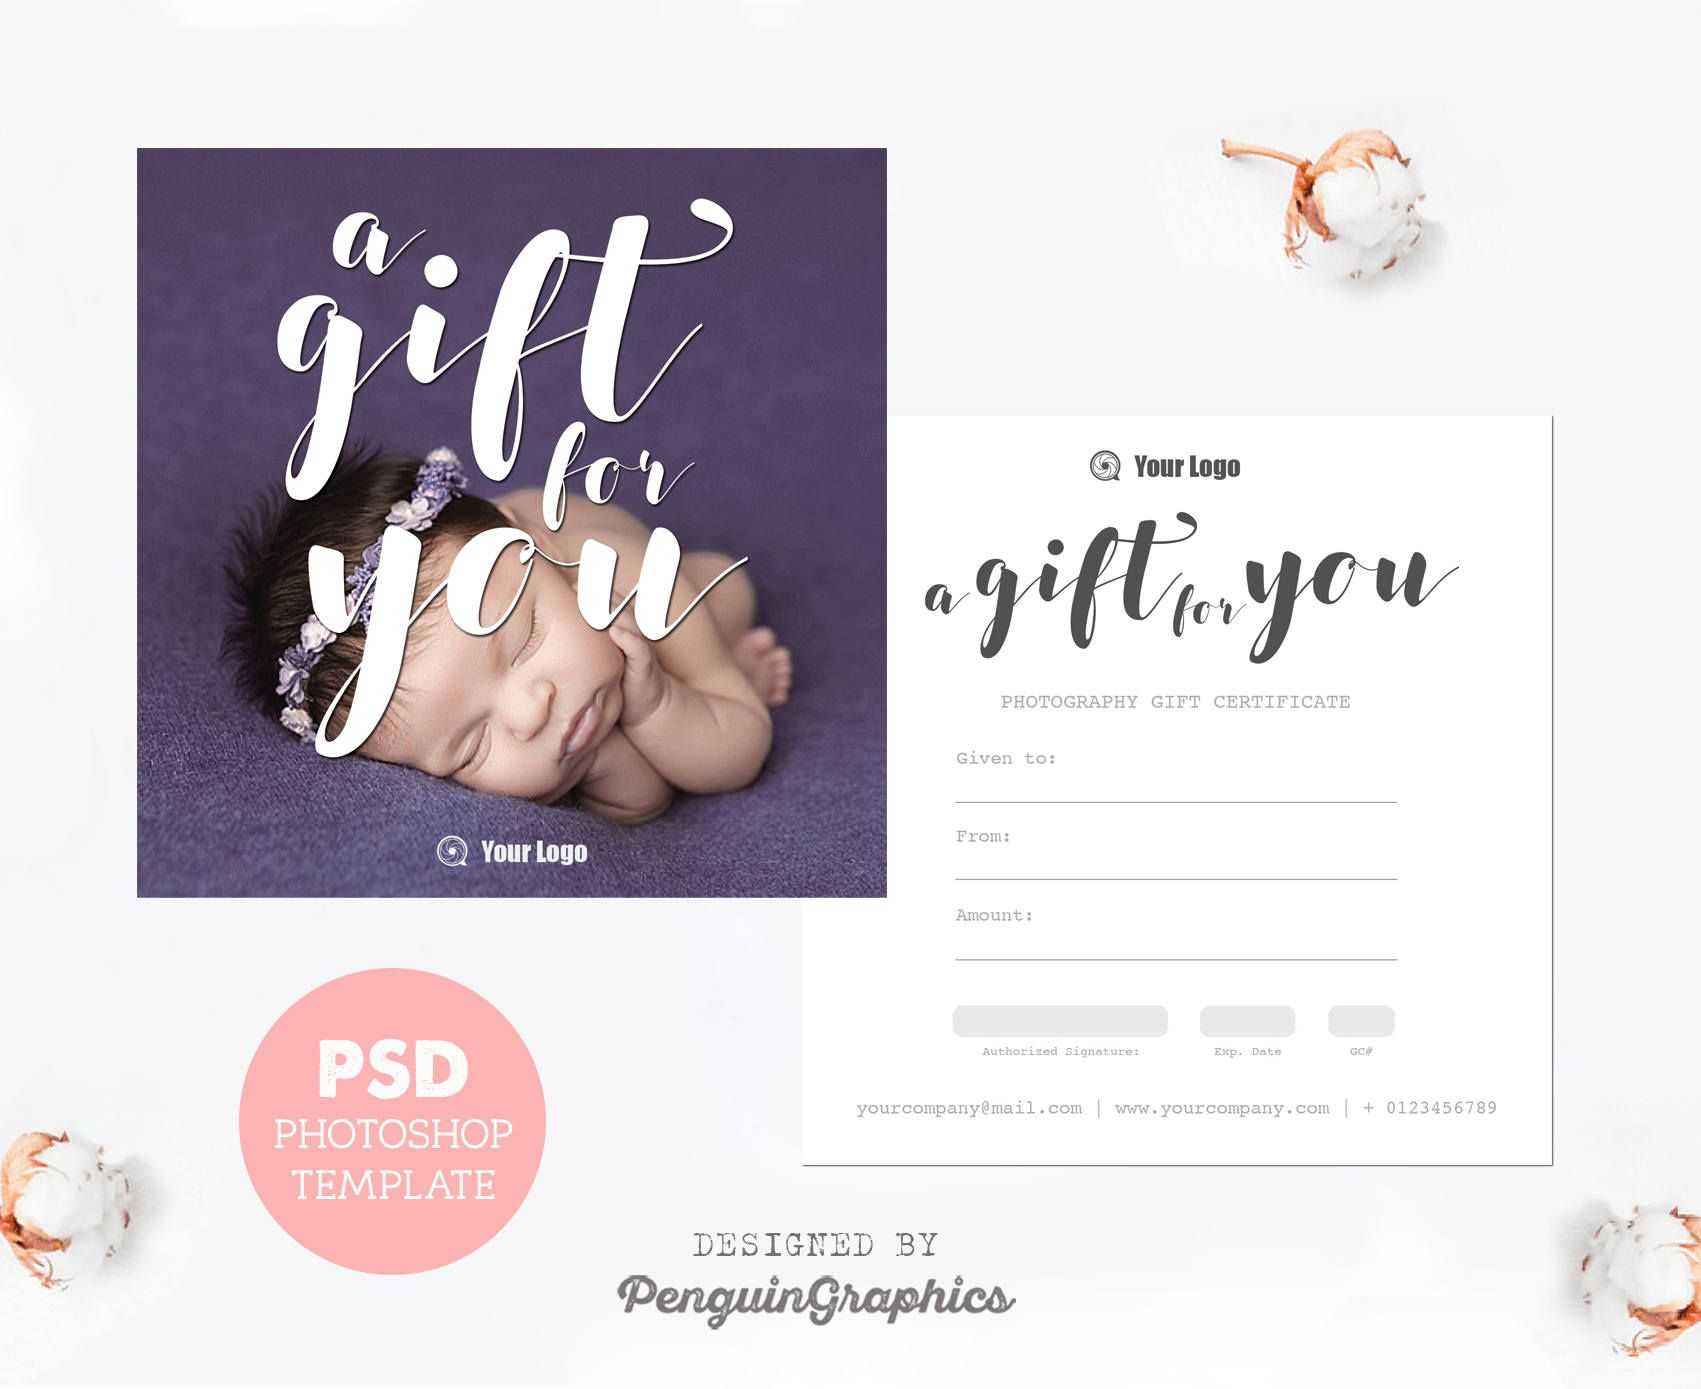 50 Stunning Photo Session Gift Certificate Template Intended For Photoshoot Gift Certificate Template